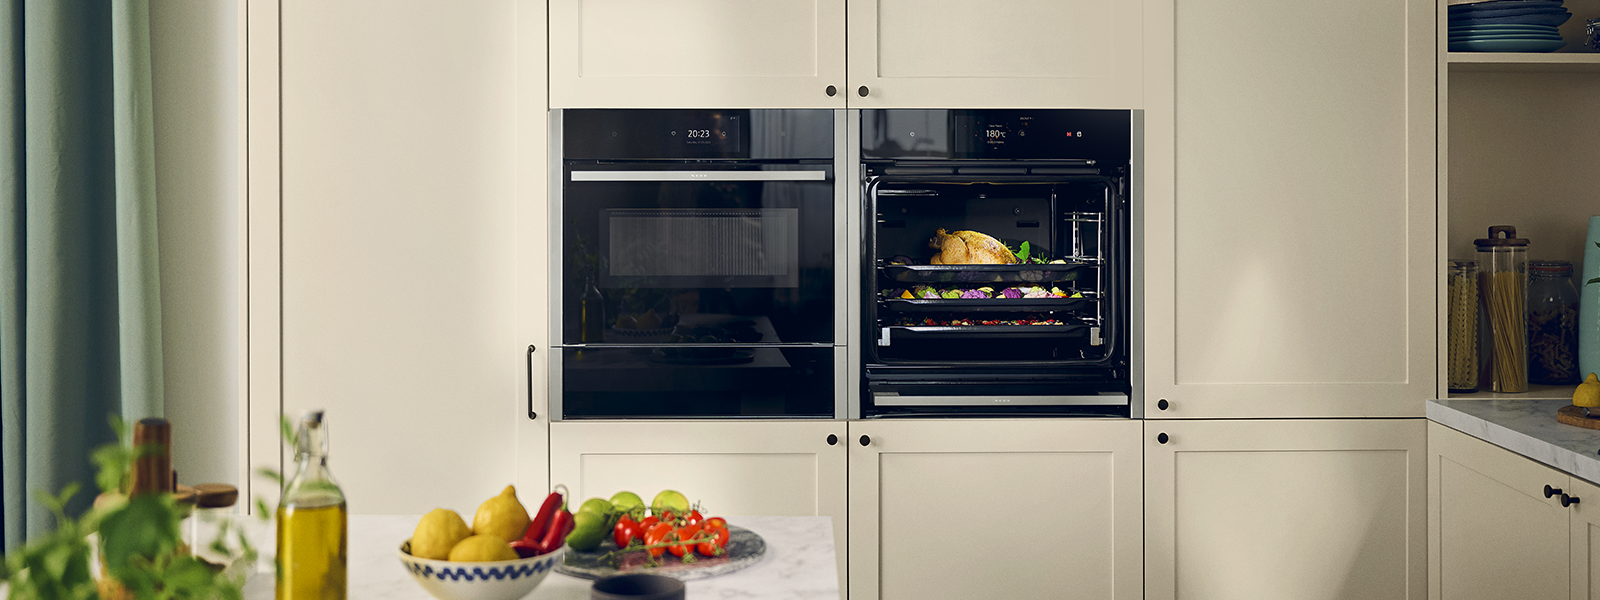 Save Up To 15% On Neff Appliances* at Hart & Co